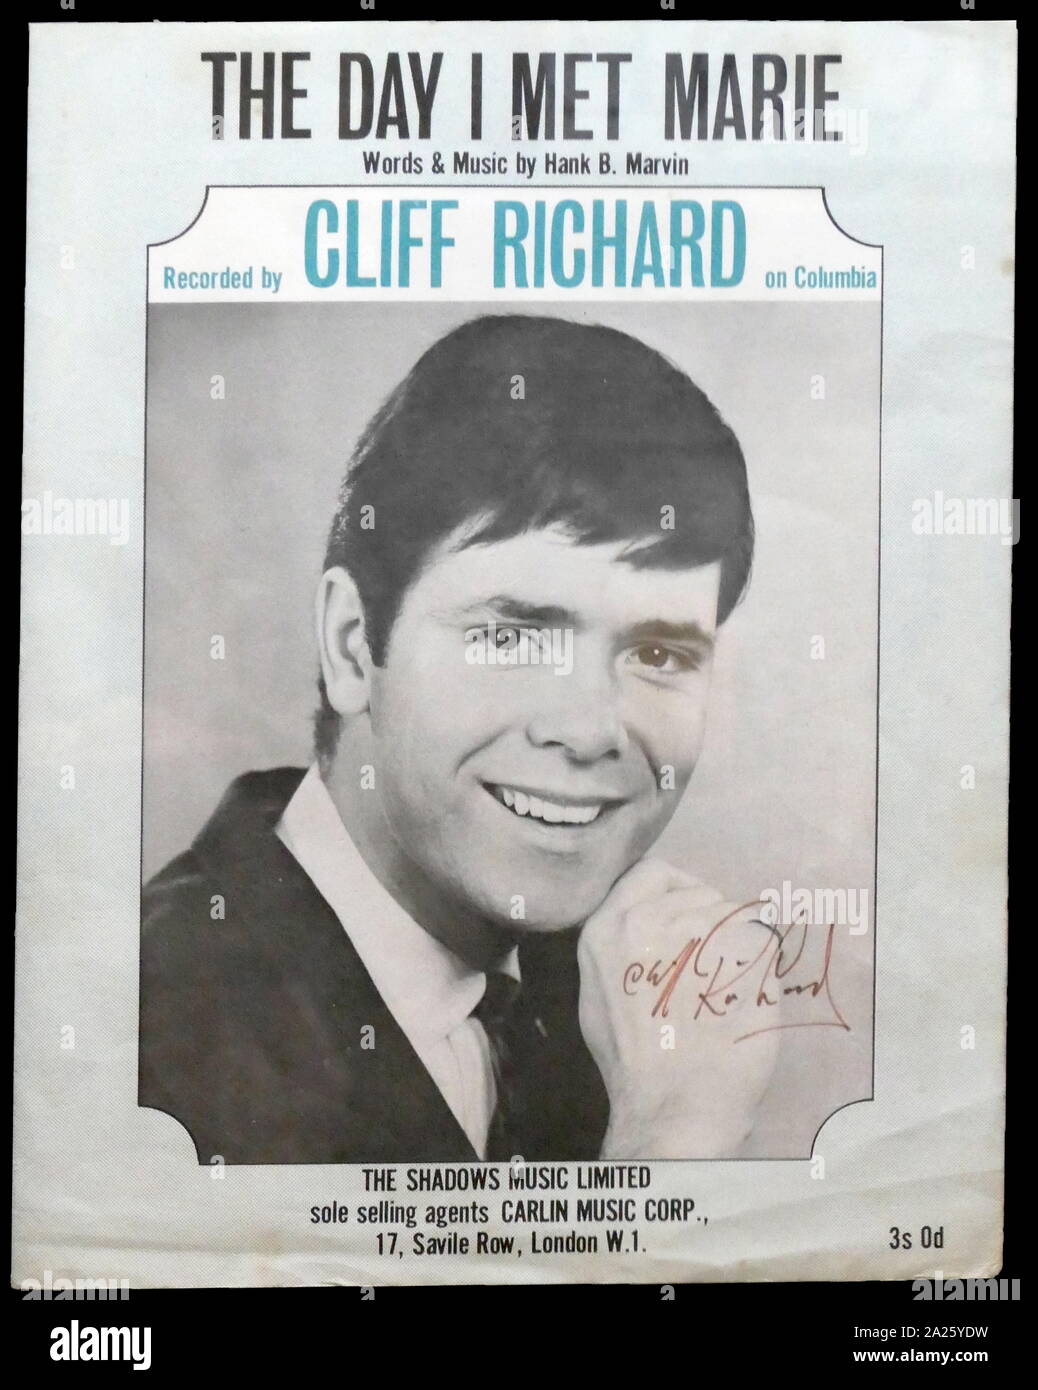 Cliff Richard 7 Poster British Pop Singer Musician Performer Picture Famous Star